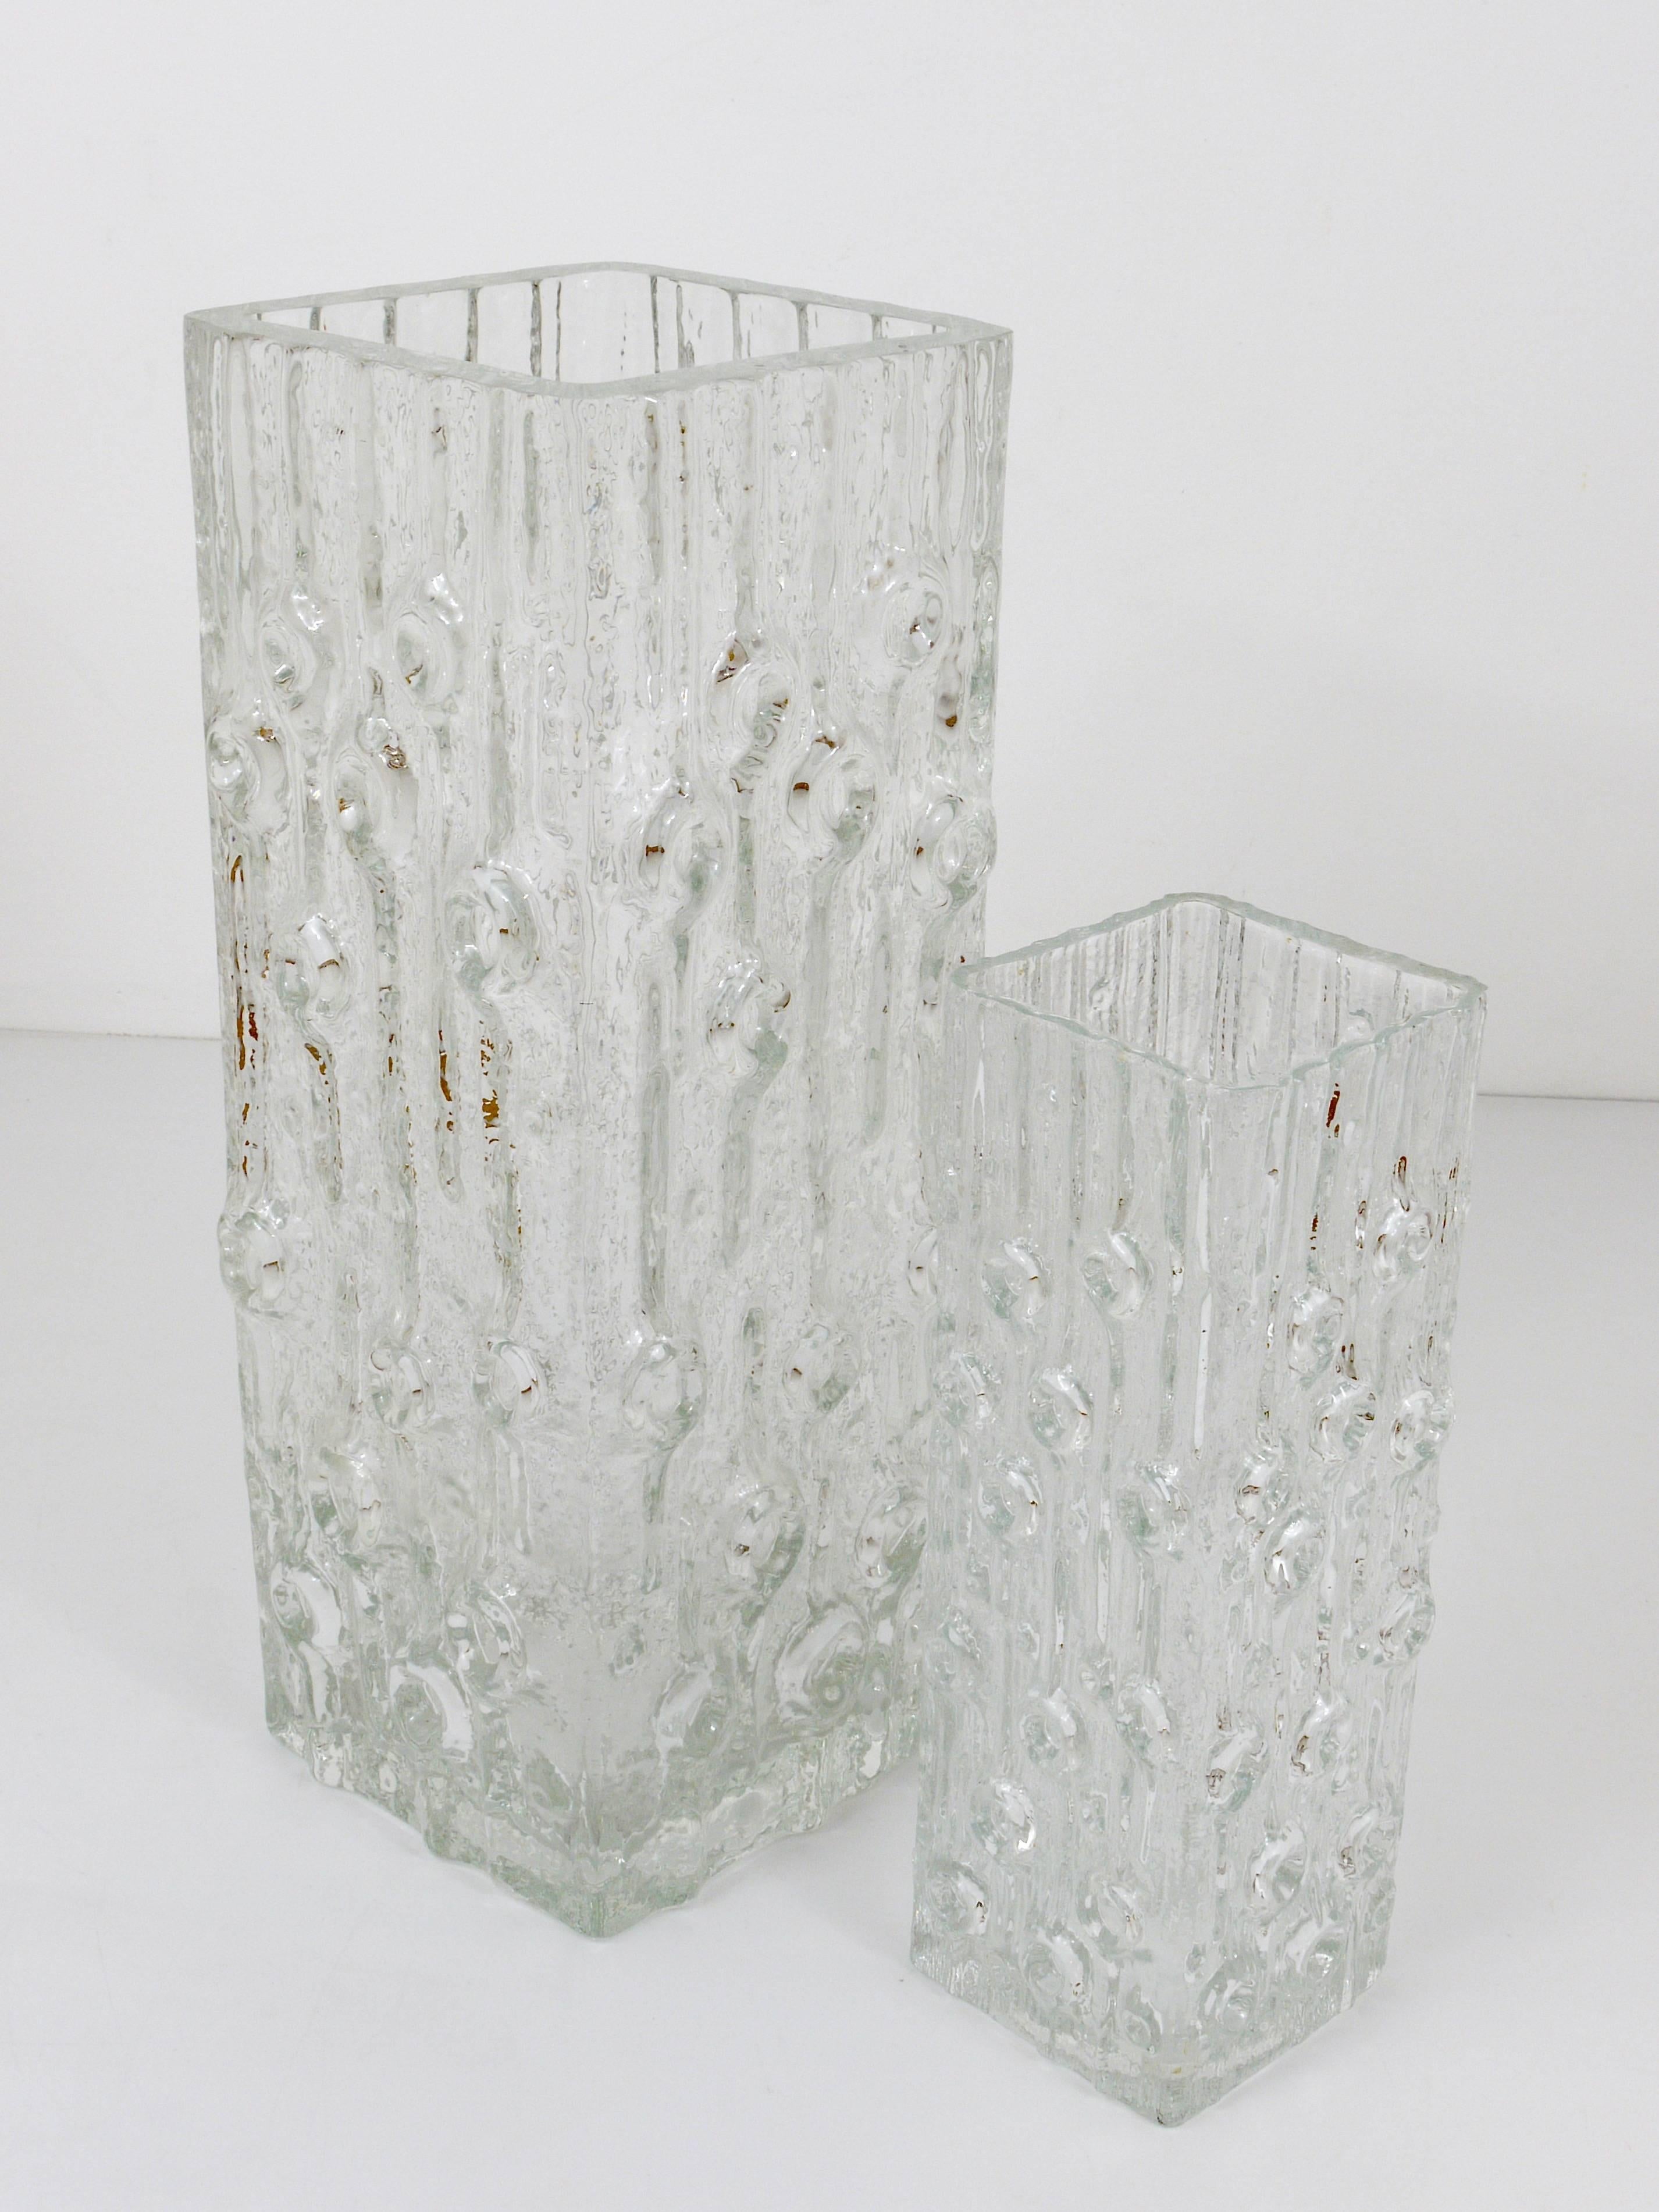 Peill & Putzler Op Art Square Modernist Ice Glass Vase, Germany, 1970s For Sale 1